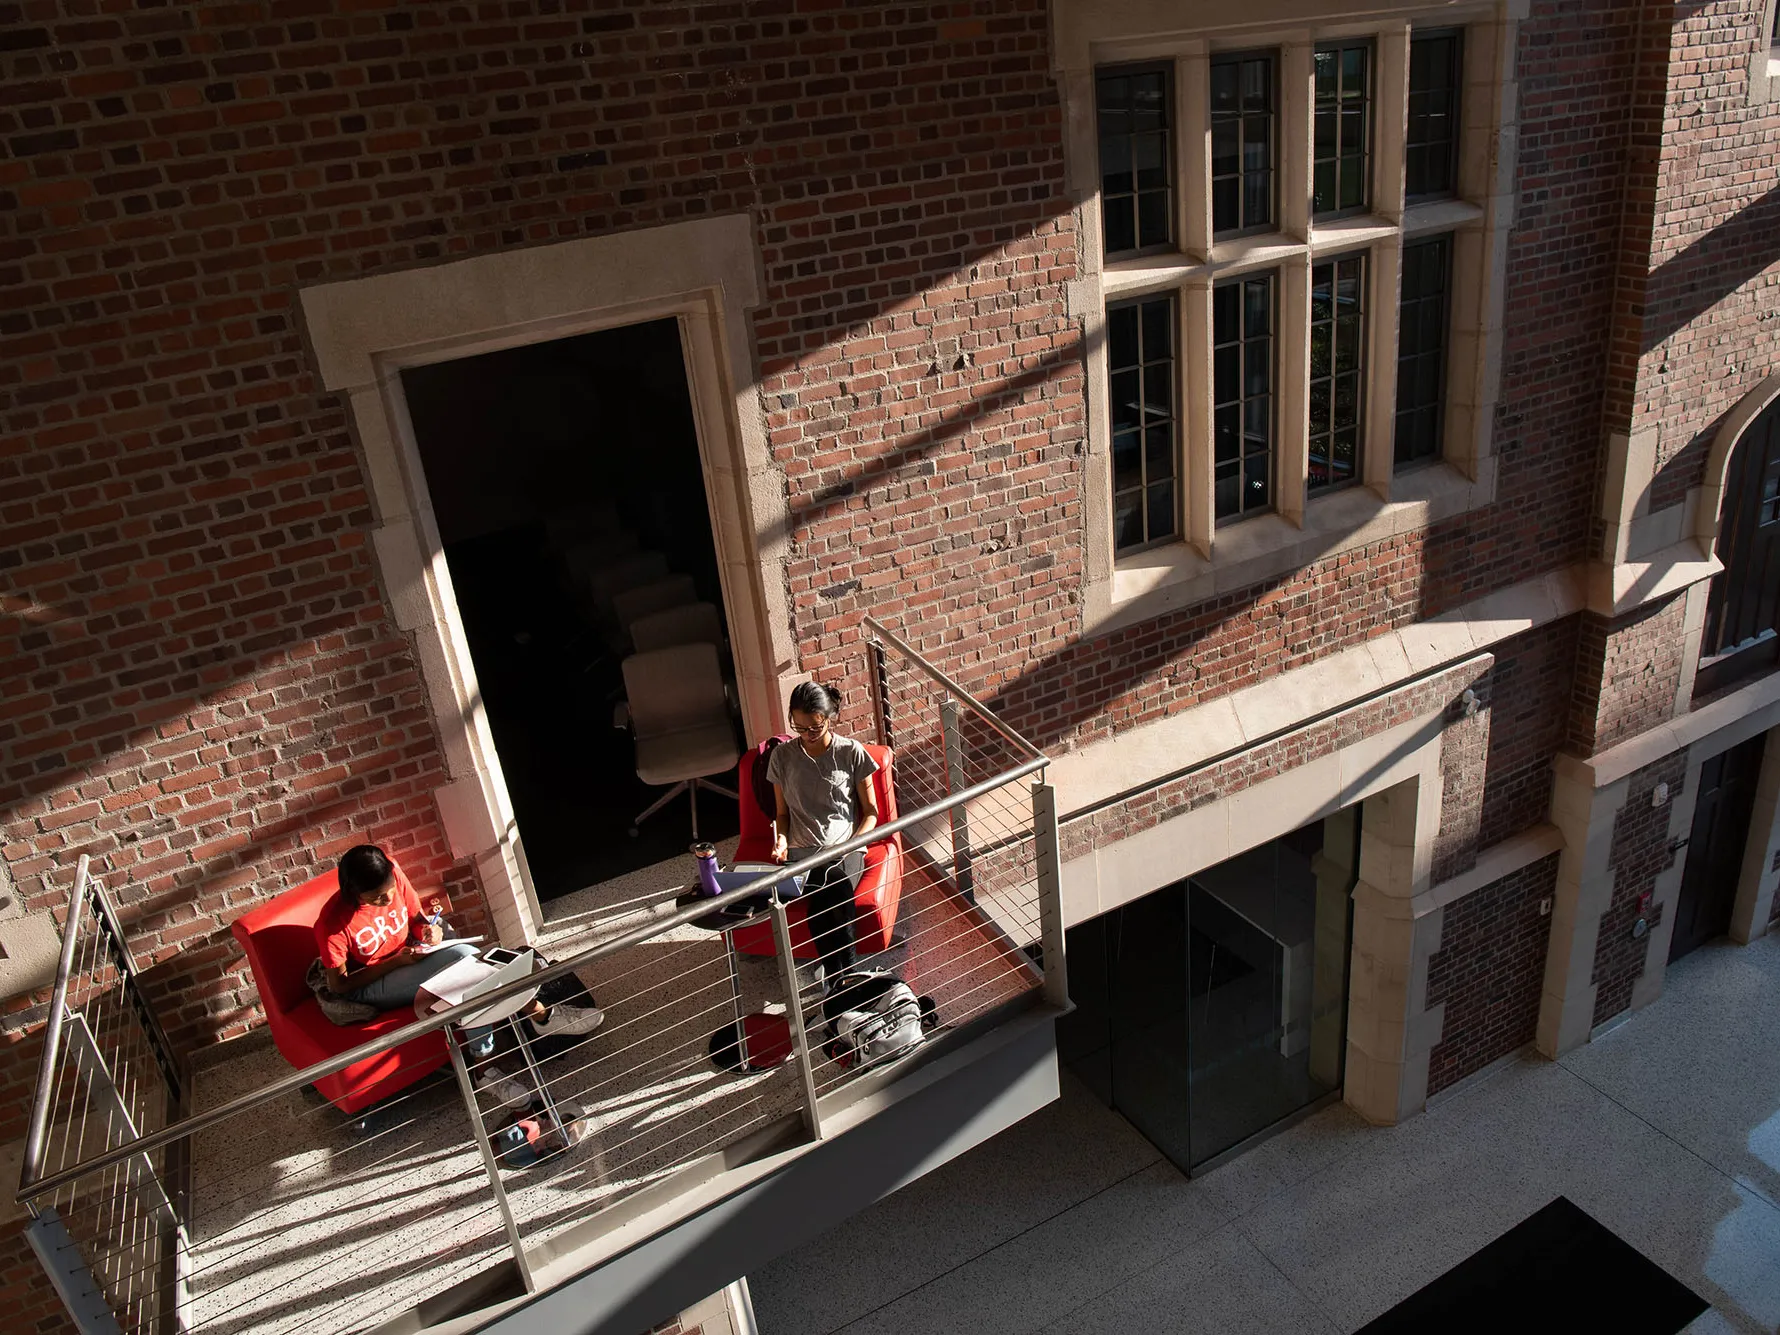 This photo shows Pomerene Hall on Ohio State’s campus. Inside, the lights are all on, so the windows glow—a geometric-pattern mural can be seen inside a wall of ground-to-roof windows. Students wearing backpacks pass by on the sidewalk in front.